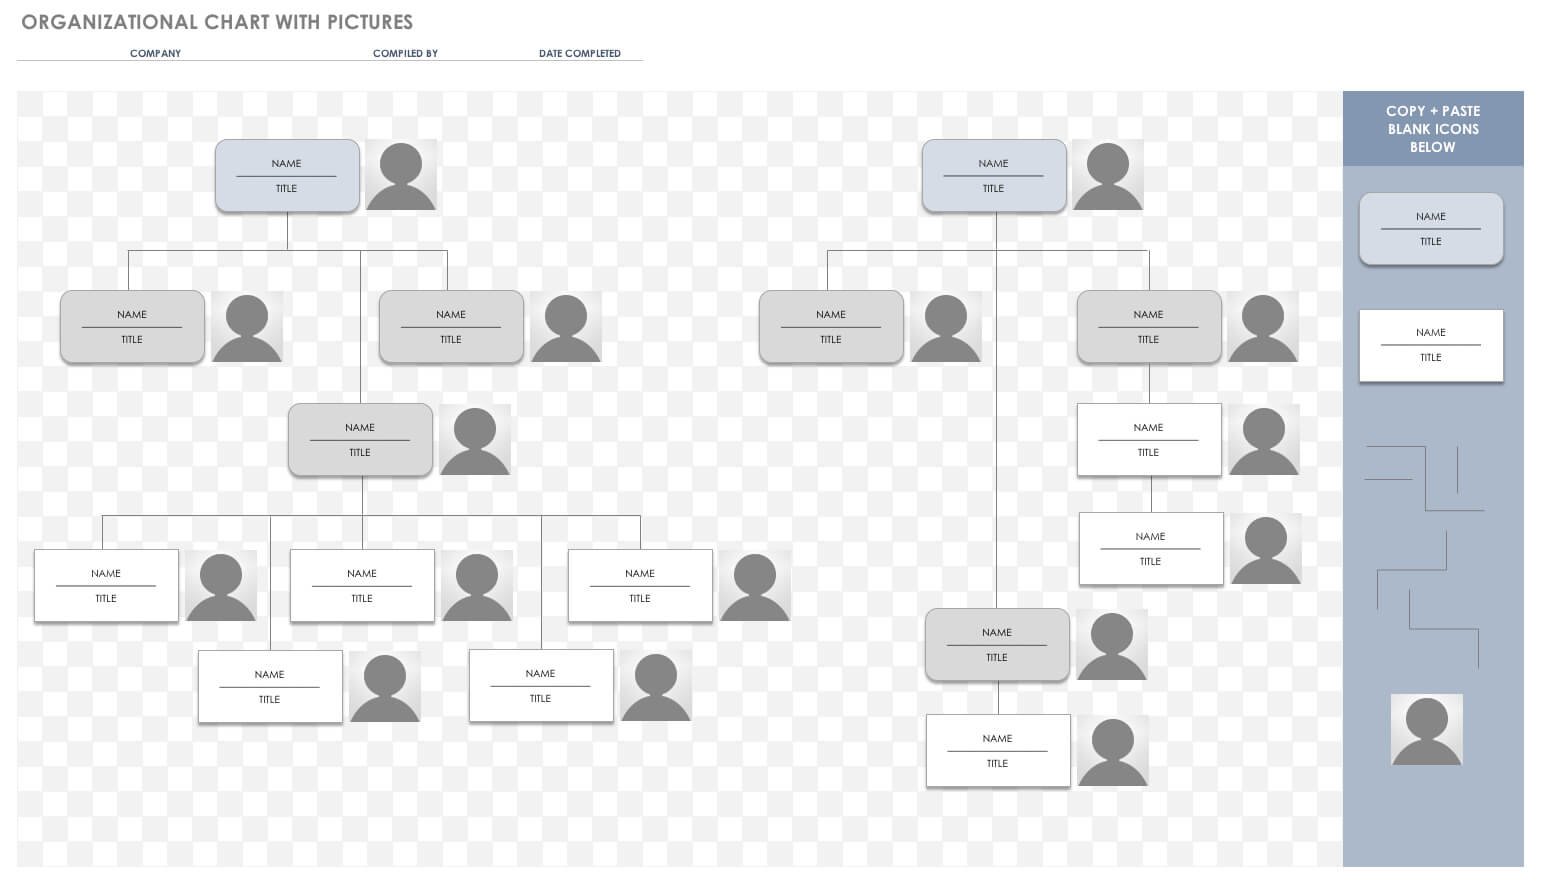 Free Org Chart Templates For Excel | Smartsheet Inside Free Blank Organizational Chart Template